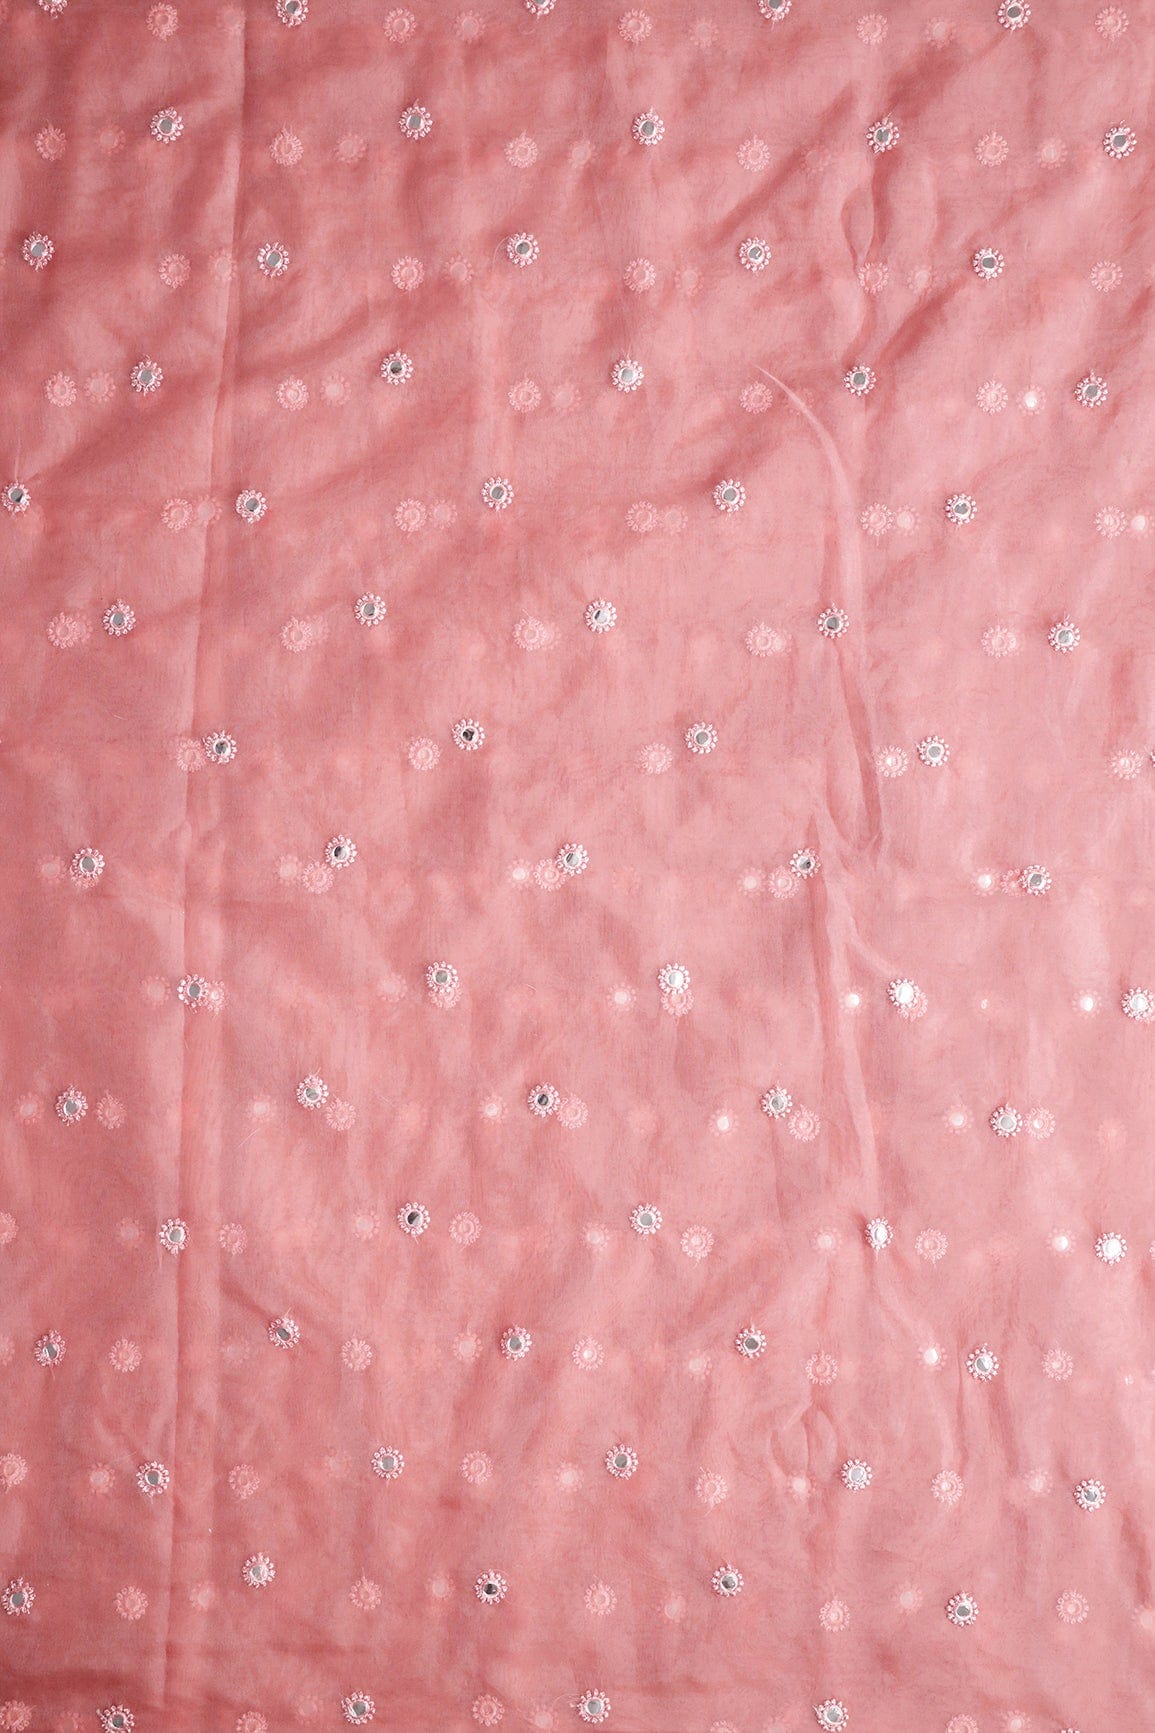 doeraa Embroidery Fabrics Pink Thread With Foil Mirror Work Small Motif Embroidery On Coral Pink Organza Fabric